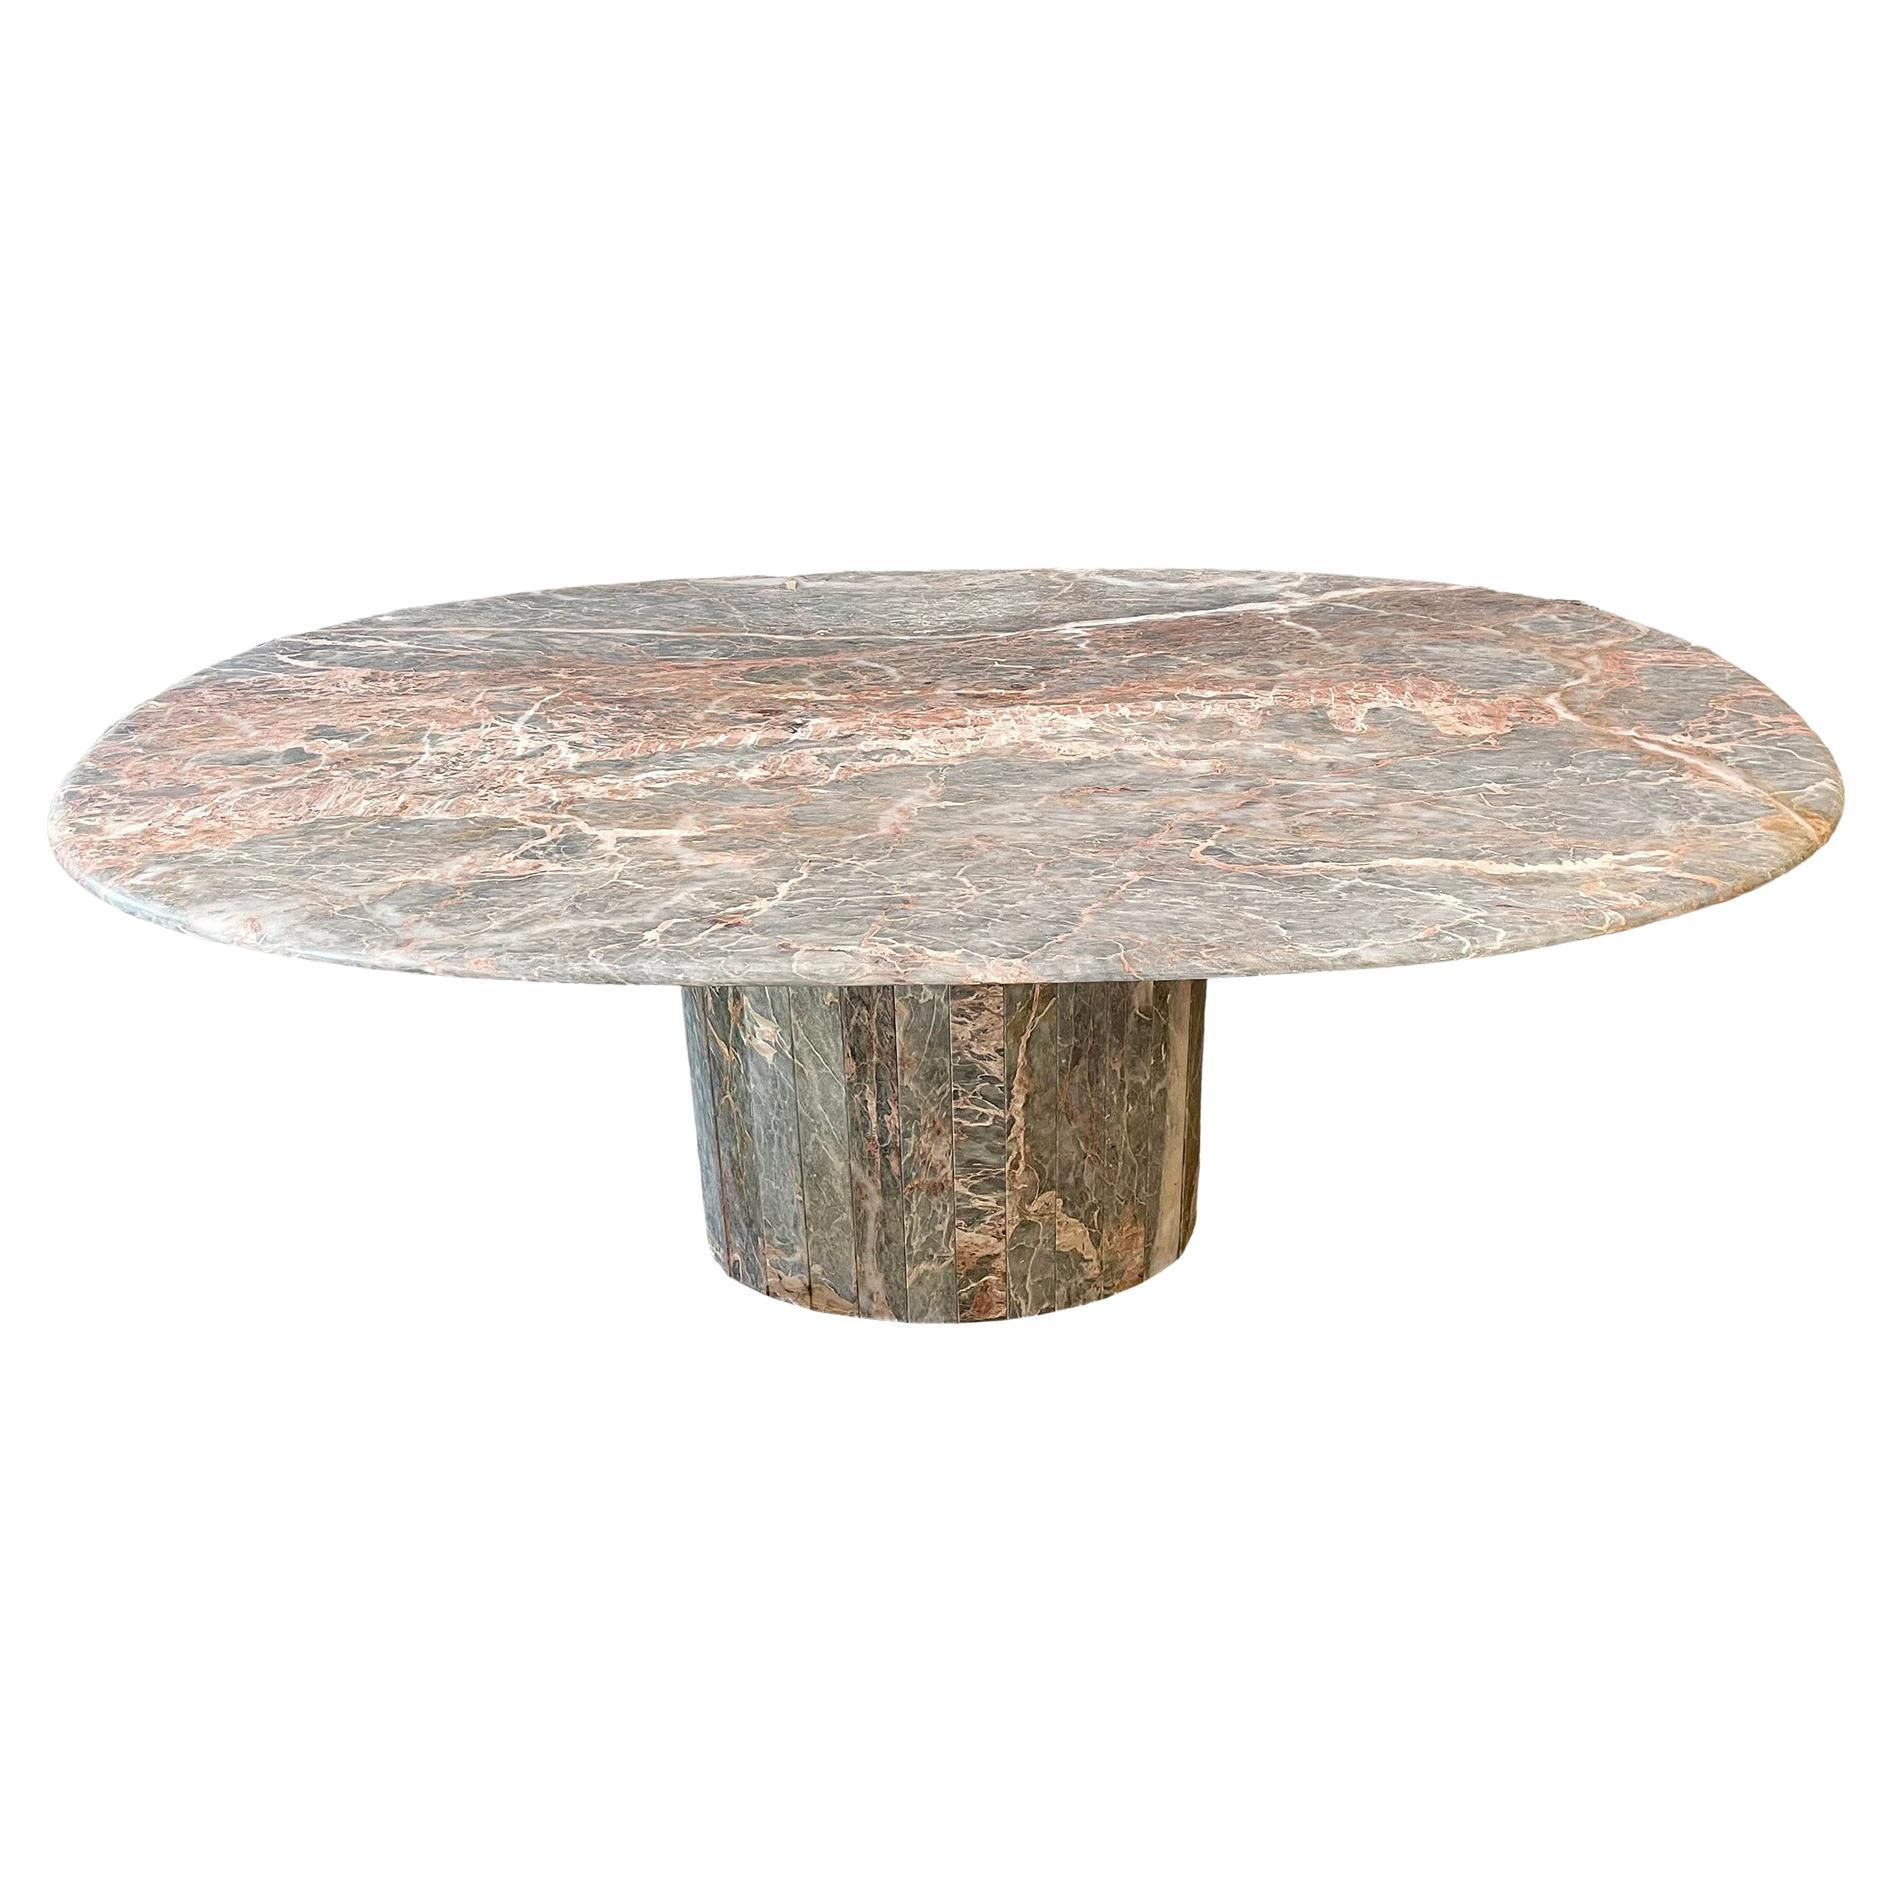 Italian Fior di Pesco Postmodern Colored Channel Base Oval Marble Dining Table